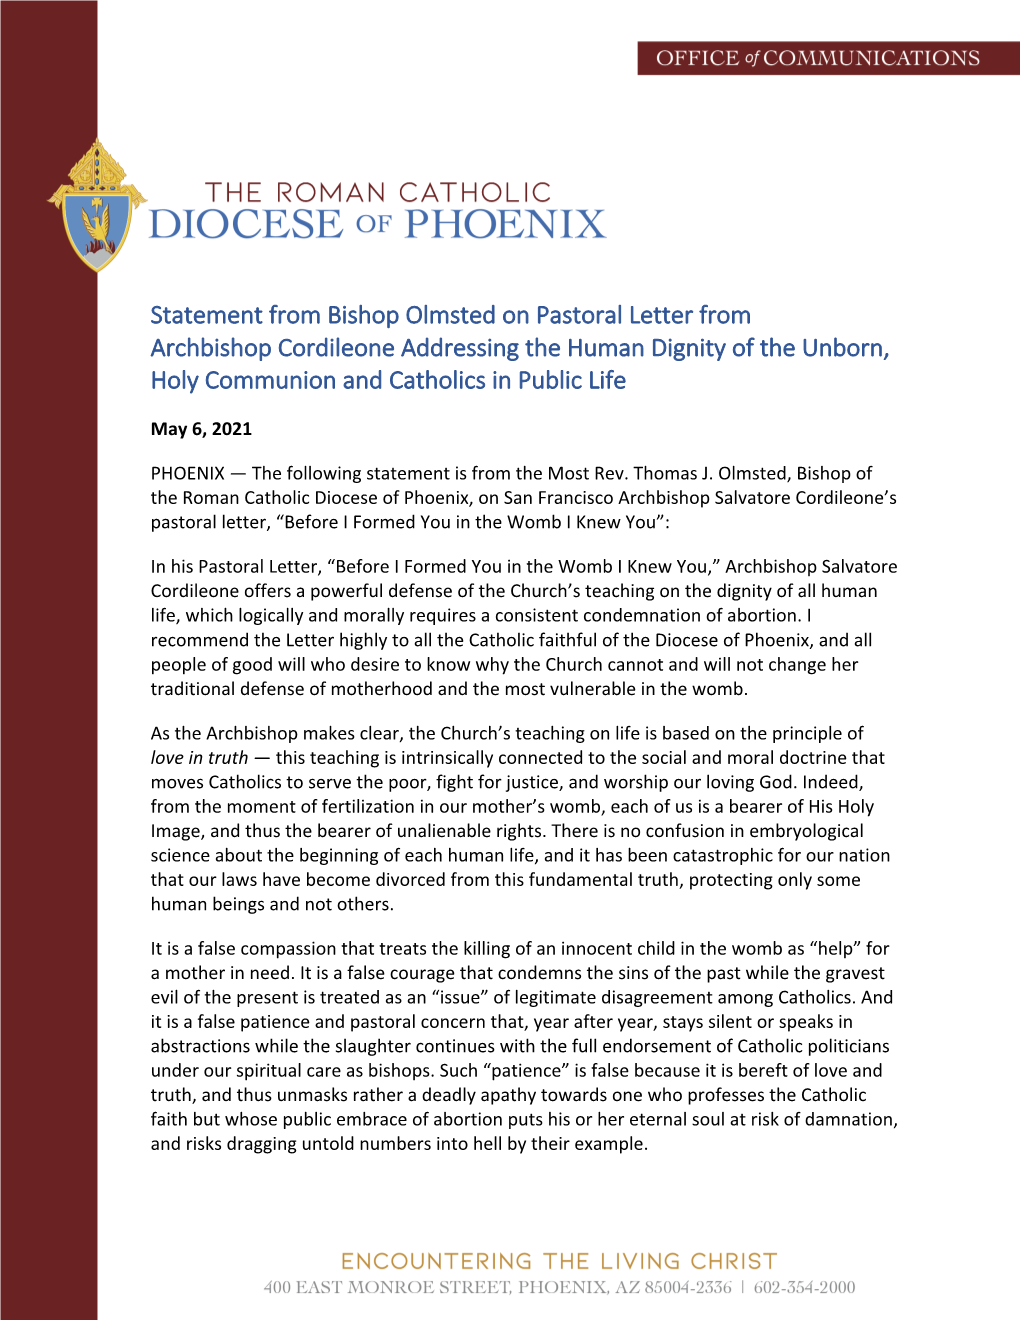 Statement from Bishop Olmsted on Pastoral Letter from Archbishop Cordileone Addressing the Human Dignity of the Unborn, Holy Communion and Catholics in Public Life